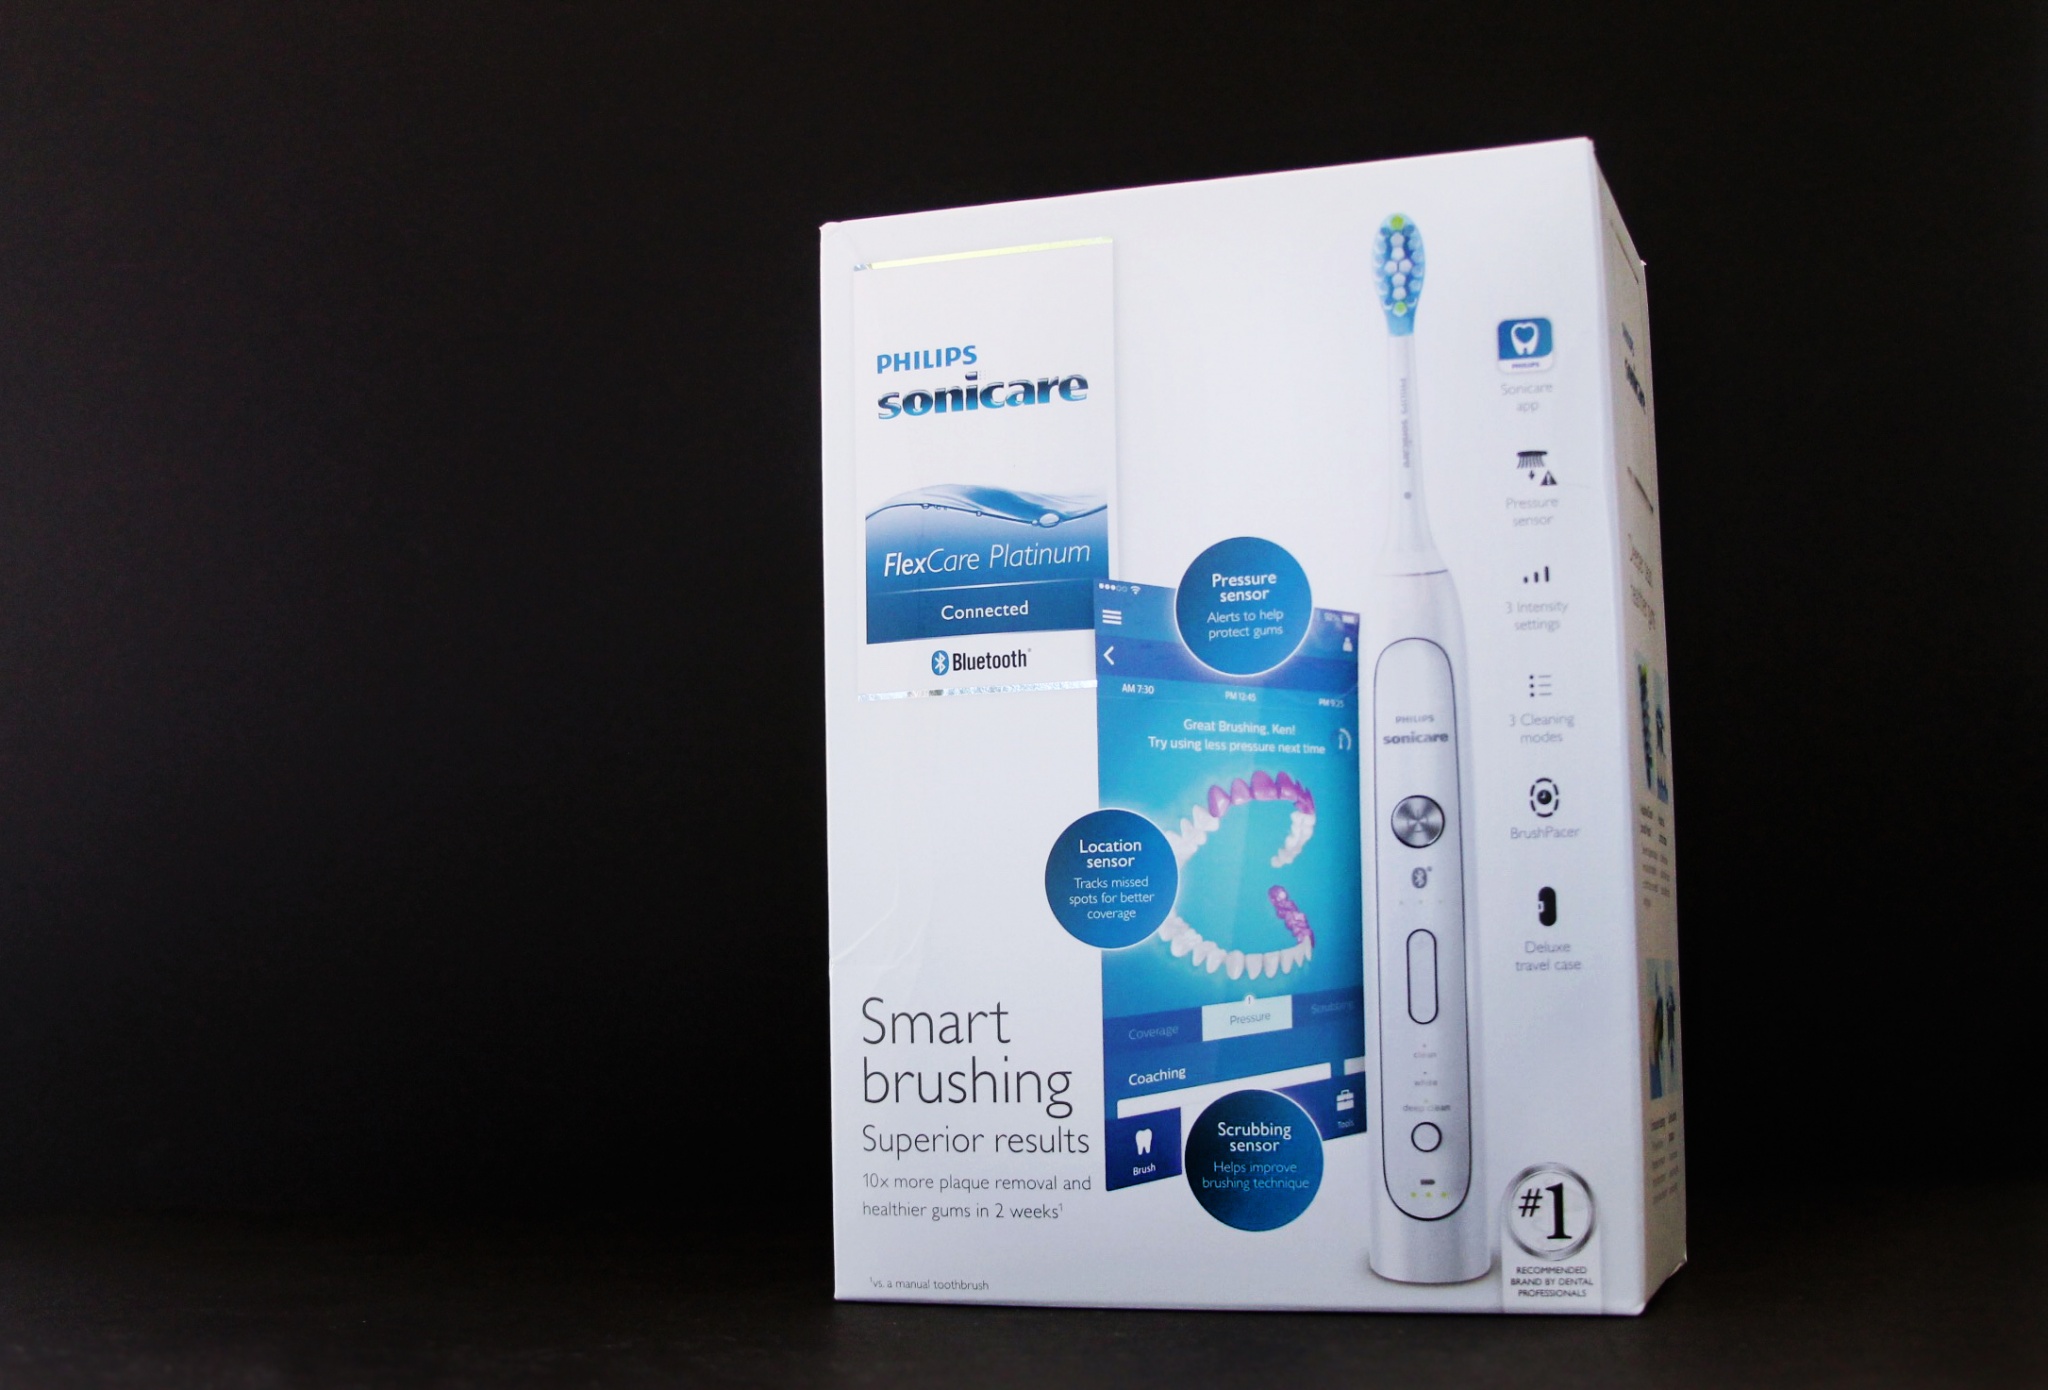 Philips Sonicare toothbrush